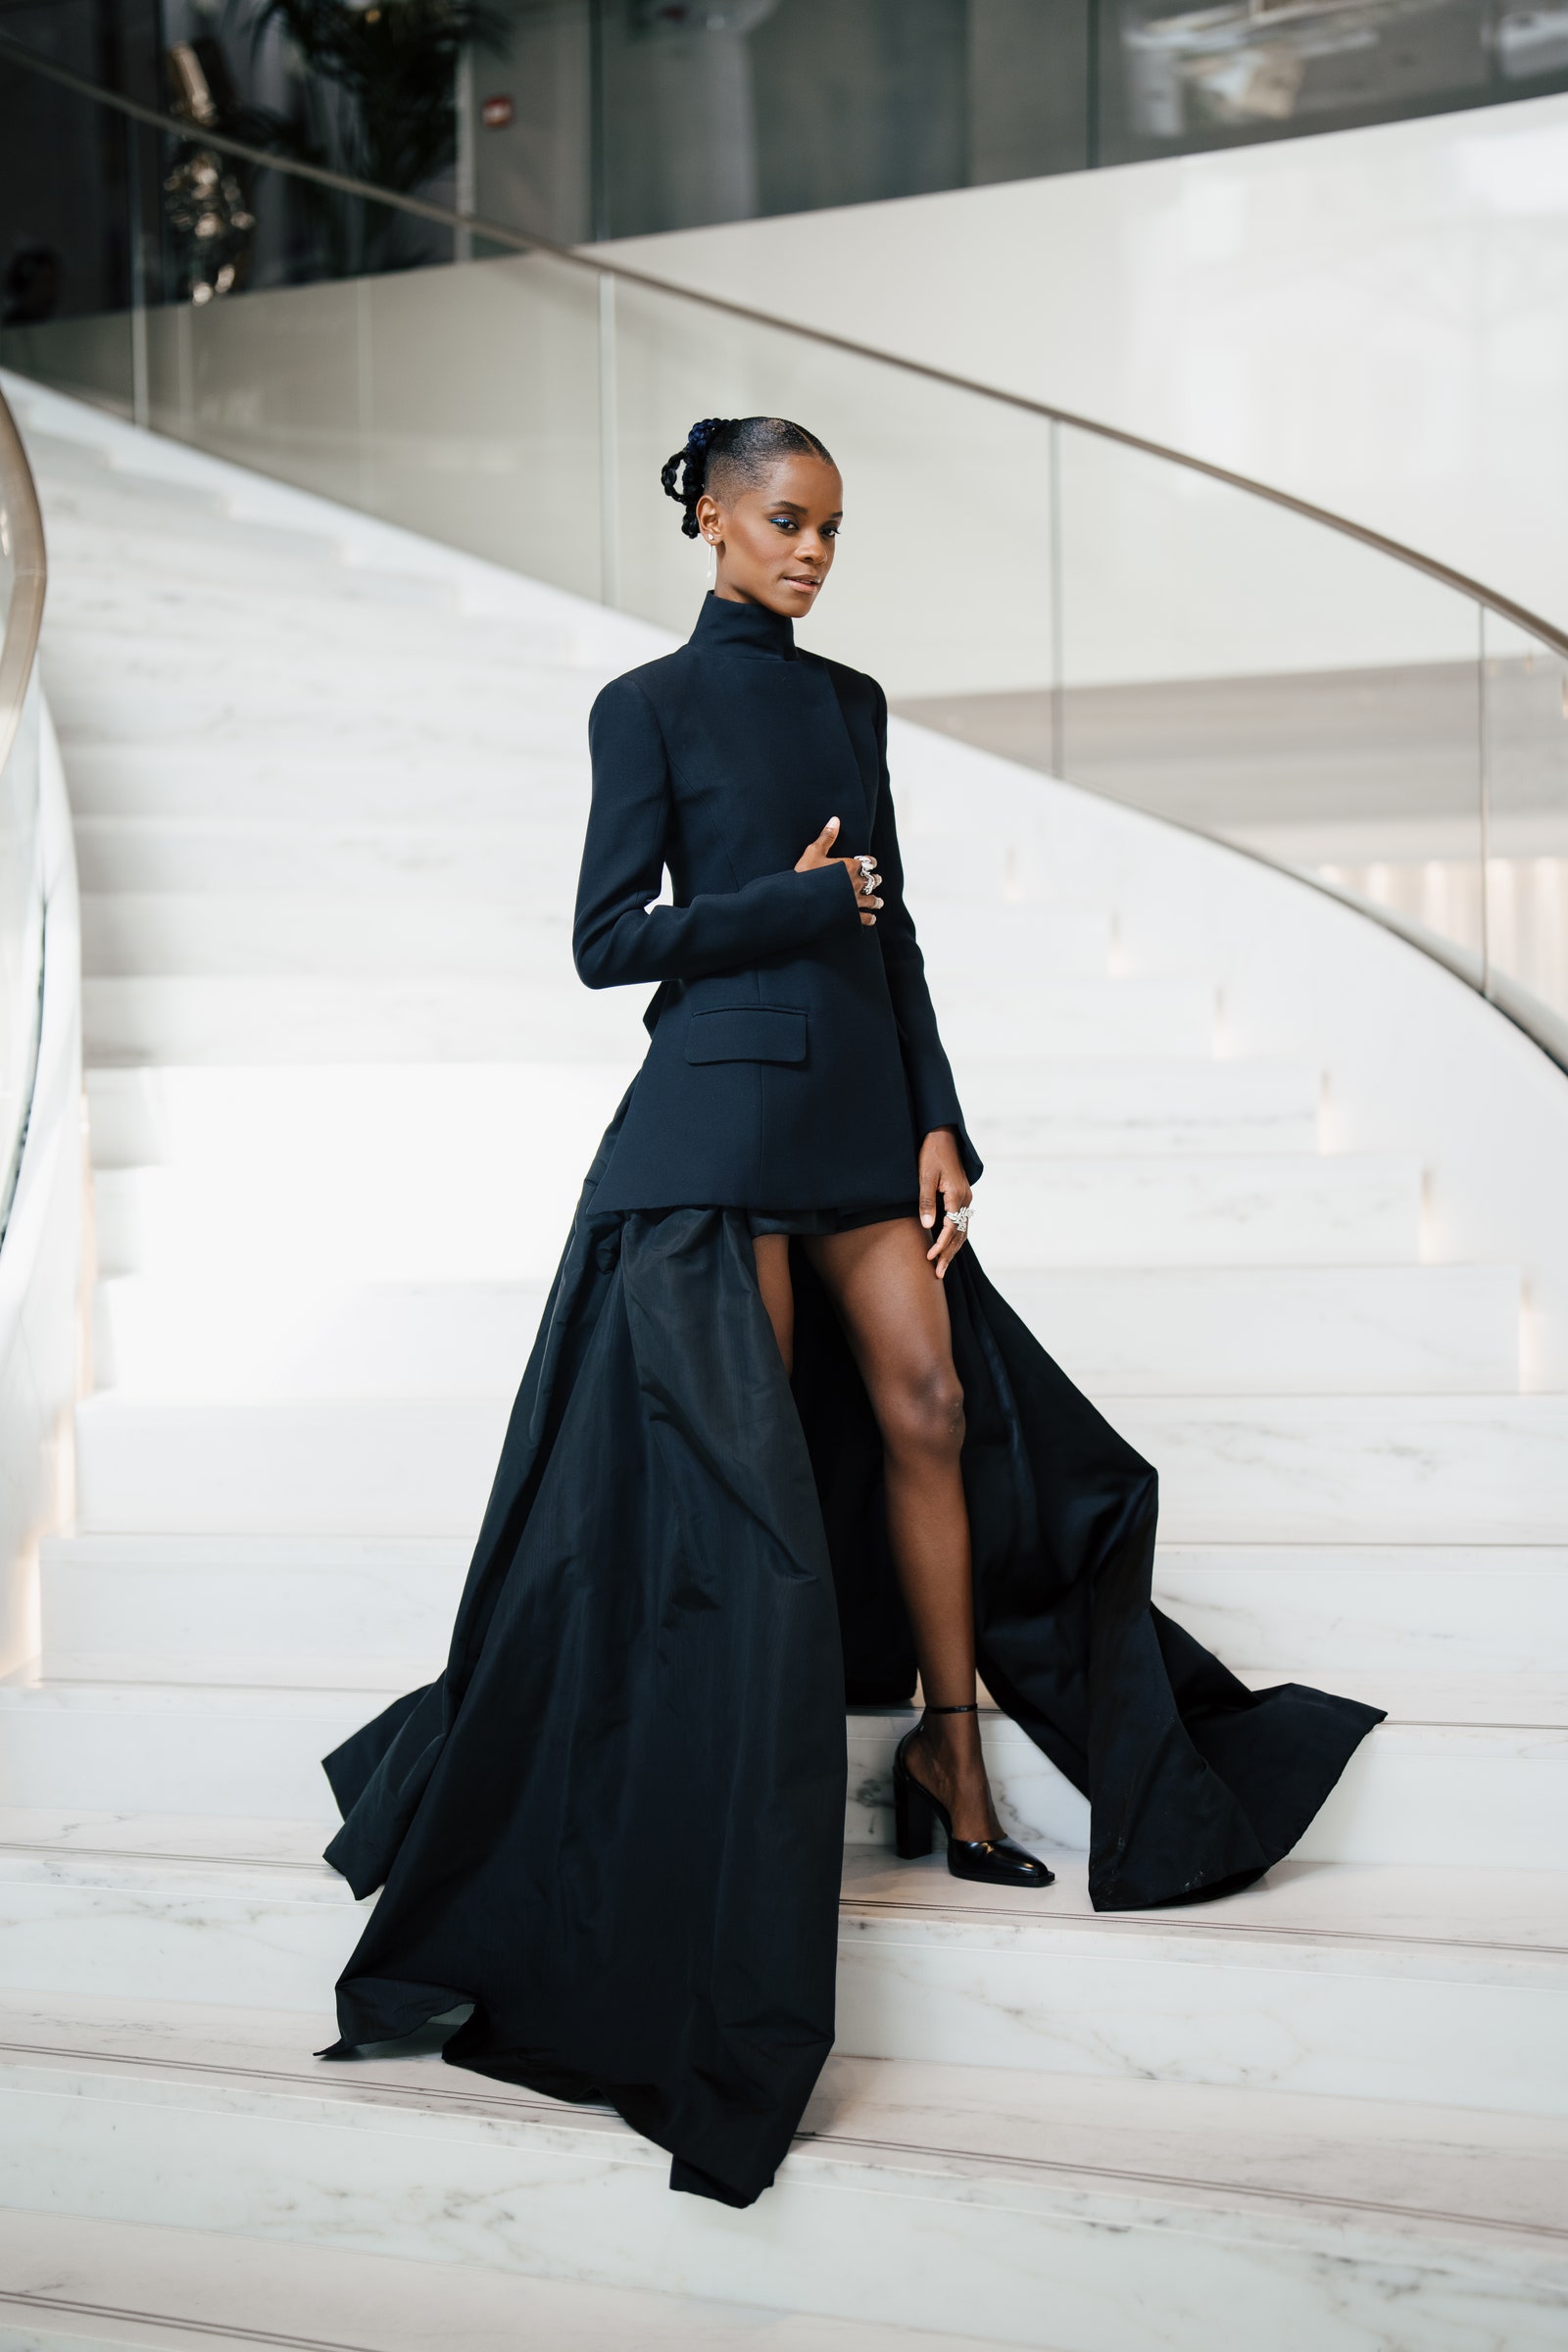 Letitia Wright Outfit at Cannes